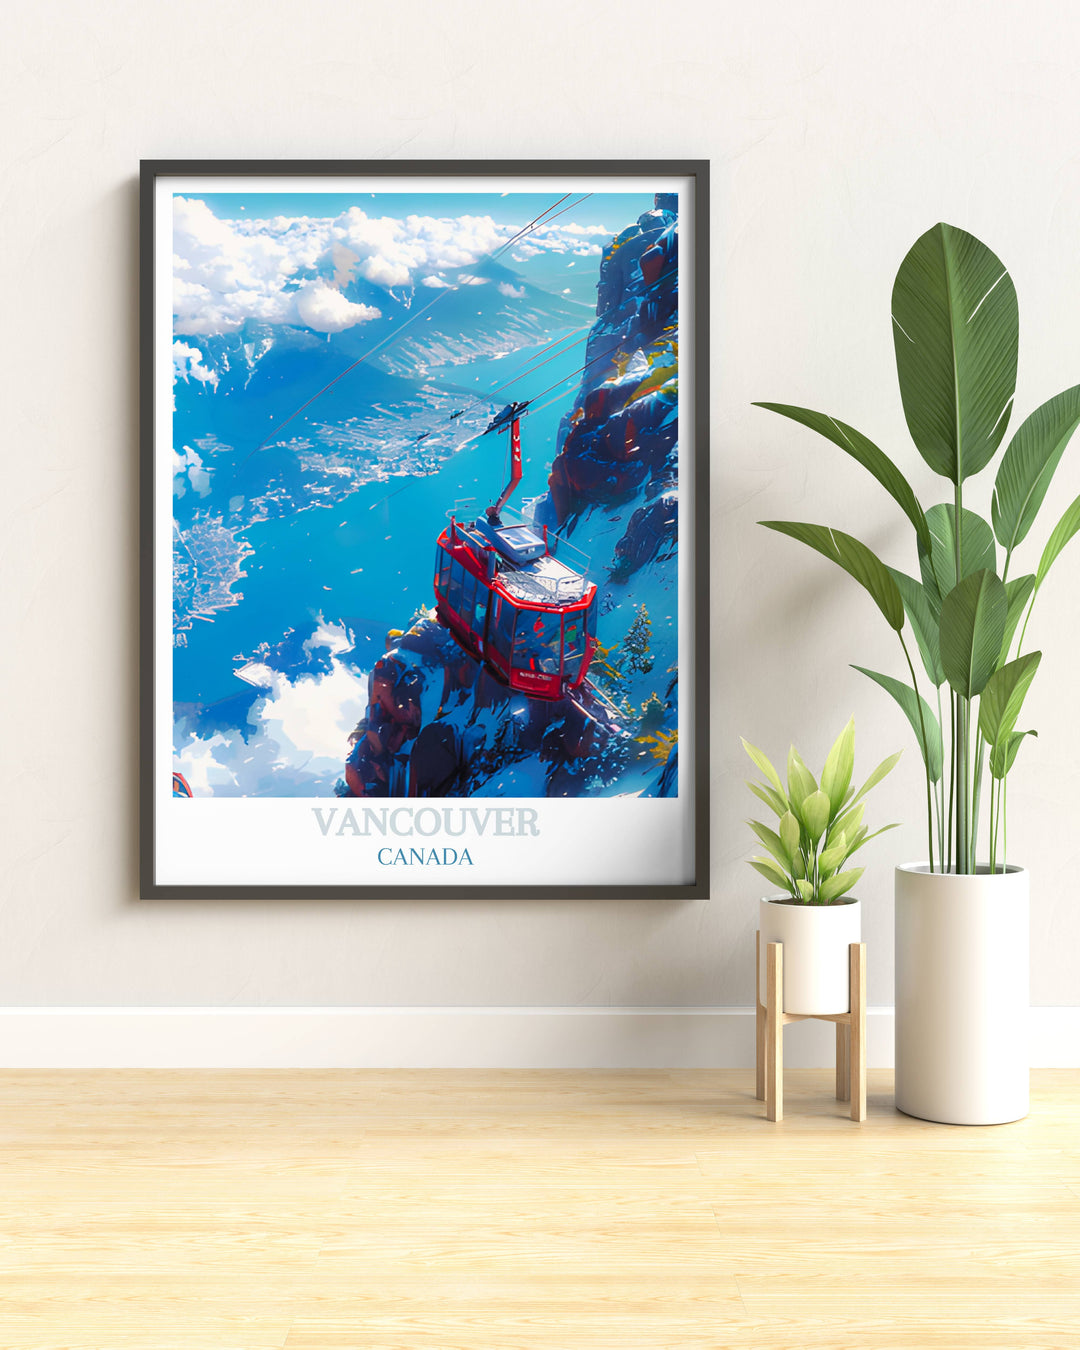 Vintage poster of Vancouver showcasing its serene natural landscapes and lush greenery. Ideal for home decor and nature enthusiasts.